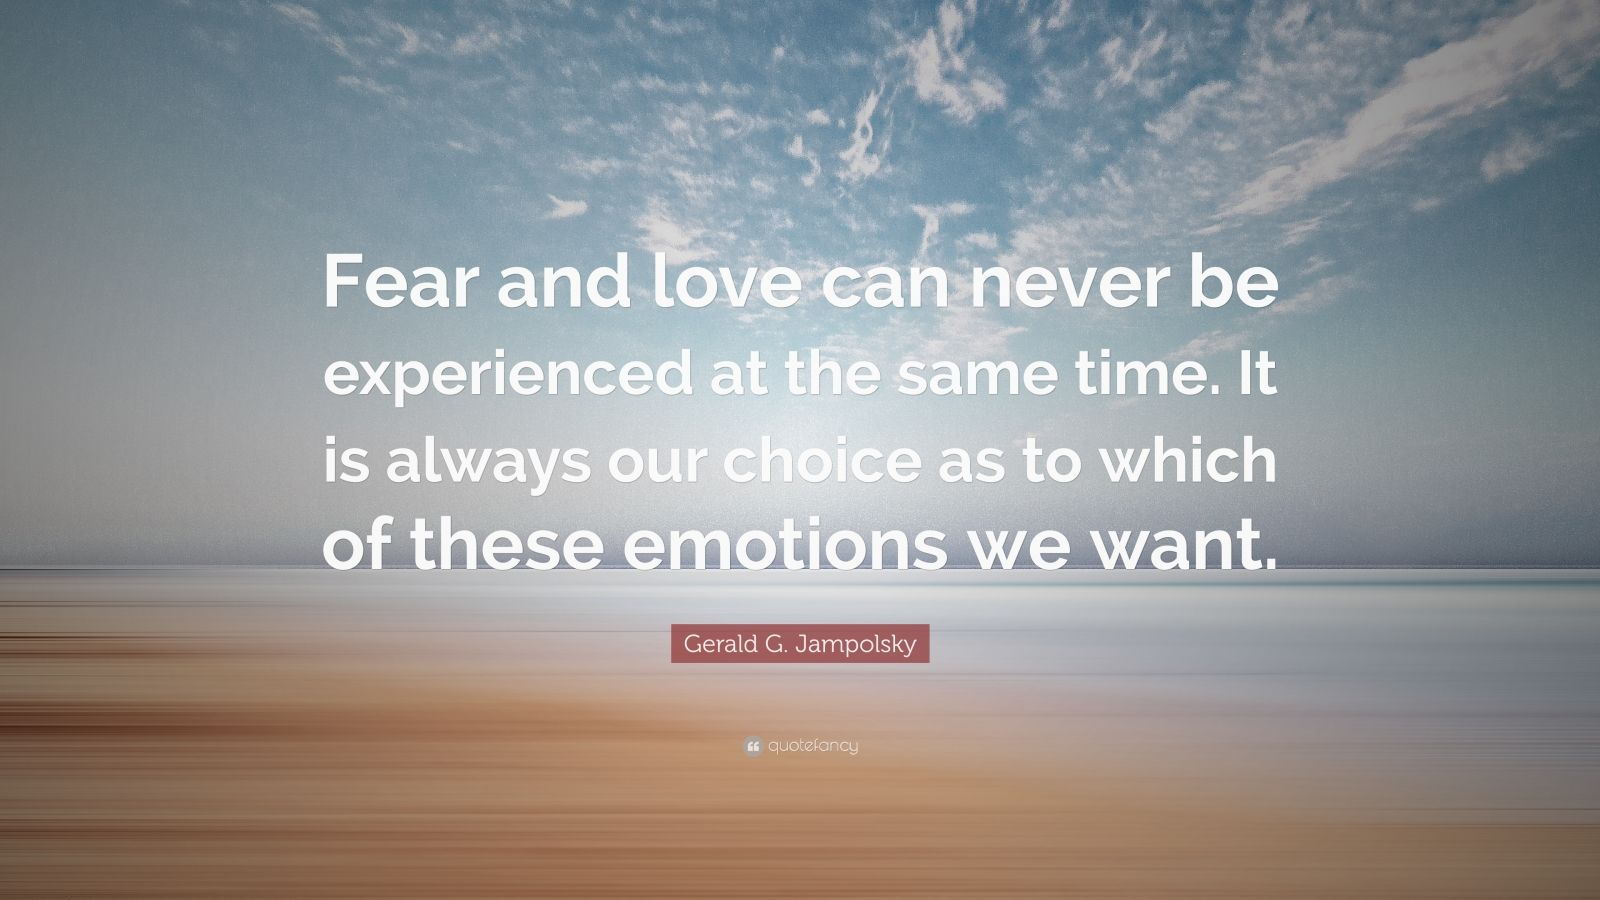 Gerald G. Jampolsky Quote: “Fear and love can never be experienced at ...